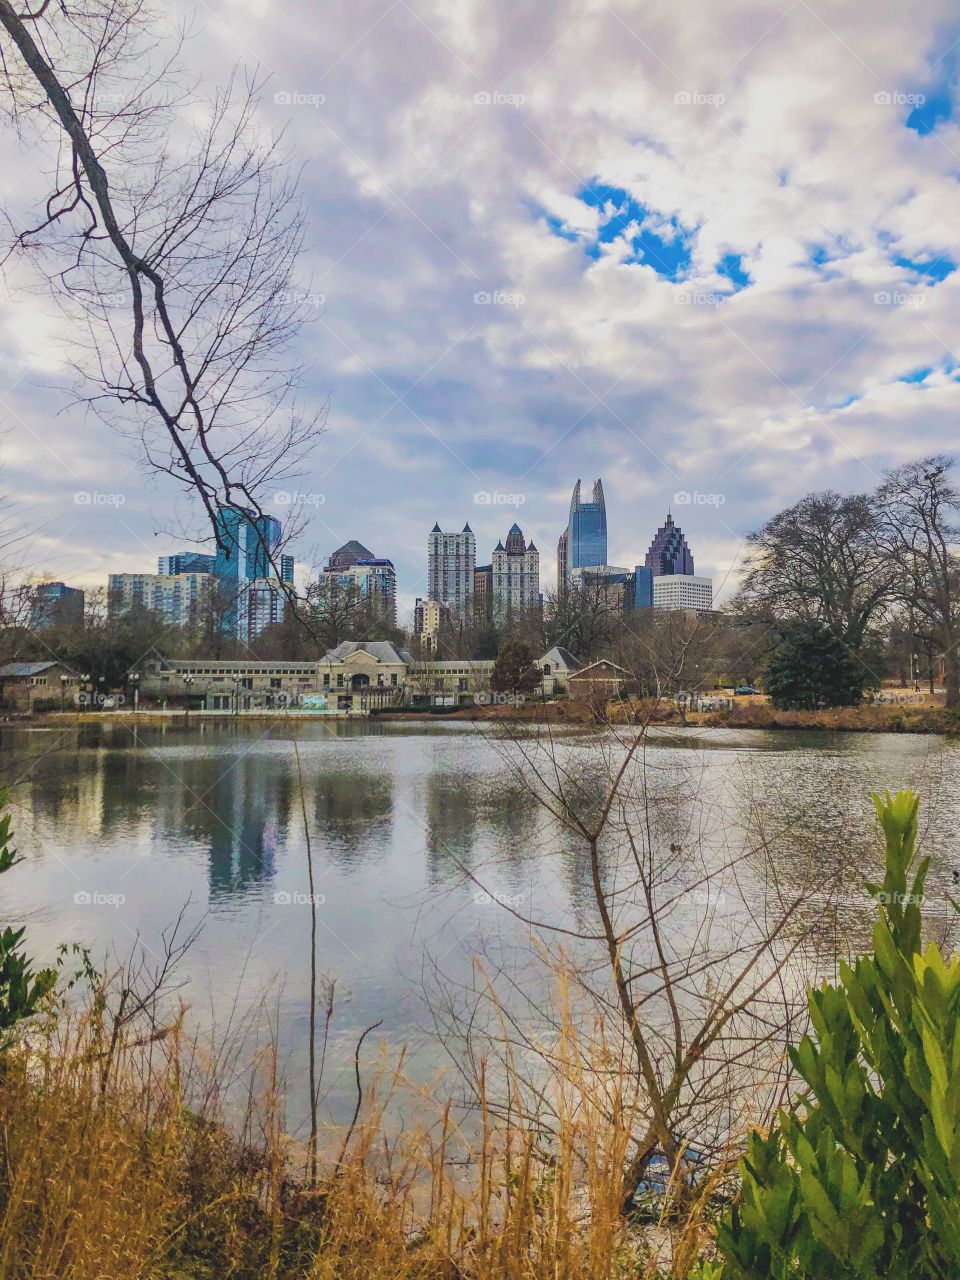 The view of Atlanta from Piedmont Park